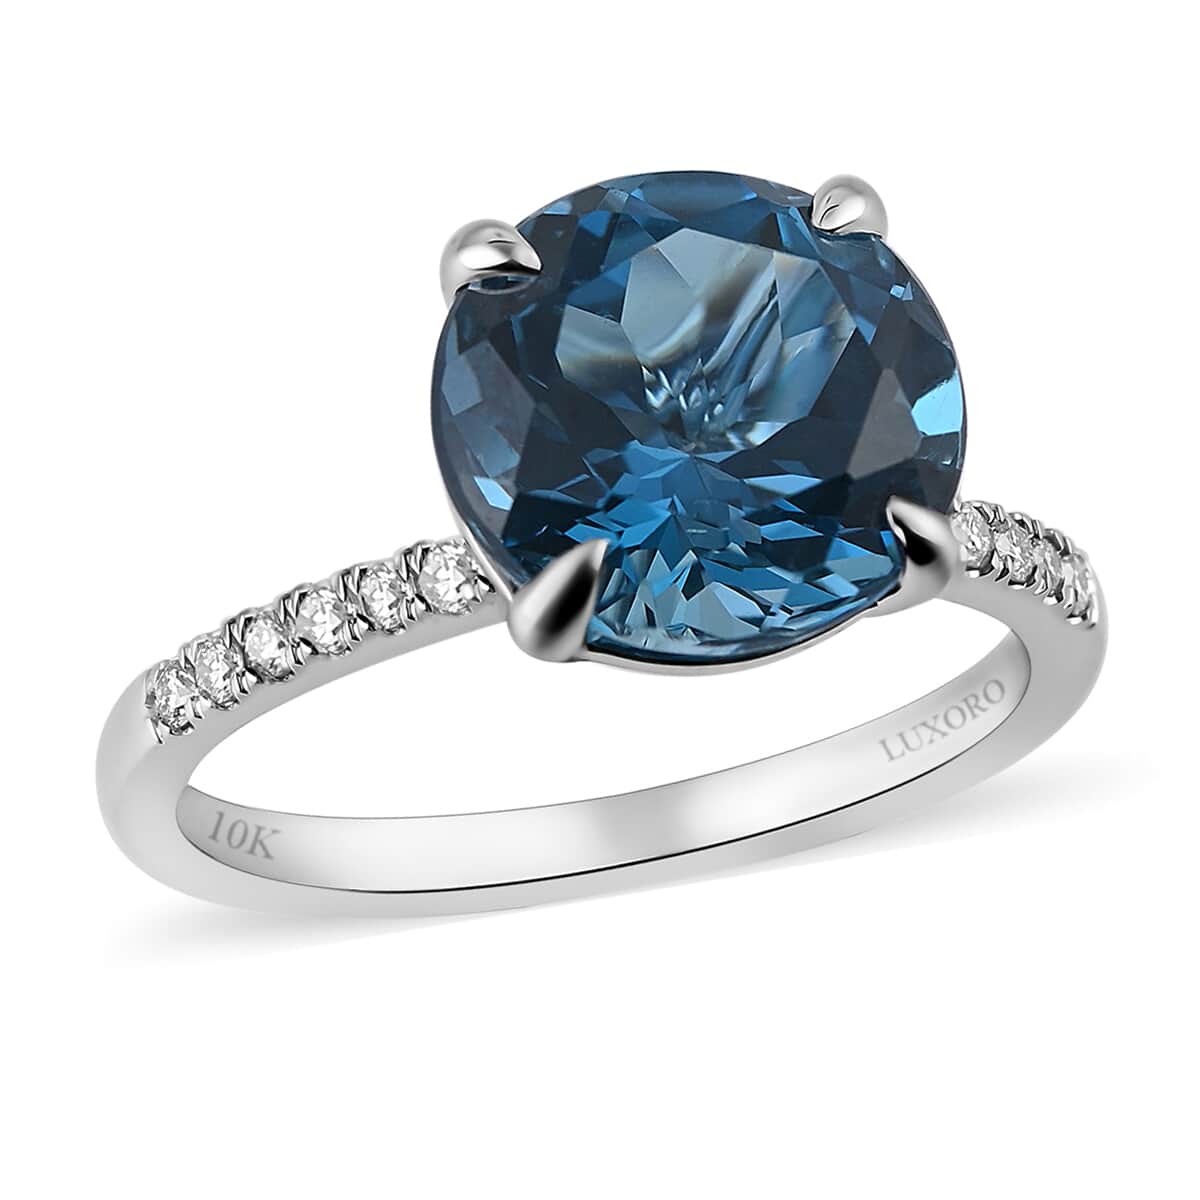 LUXORO 10K White Gold AAA London Blue Topaz and Diamond Solitaire Ring (Size 10.0) 2.40 Grams 4.85 ctw image number 0